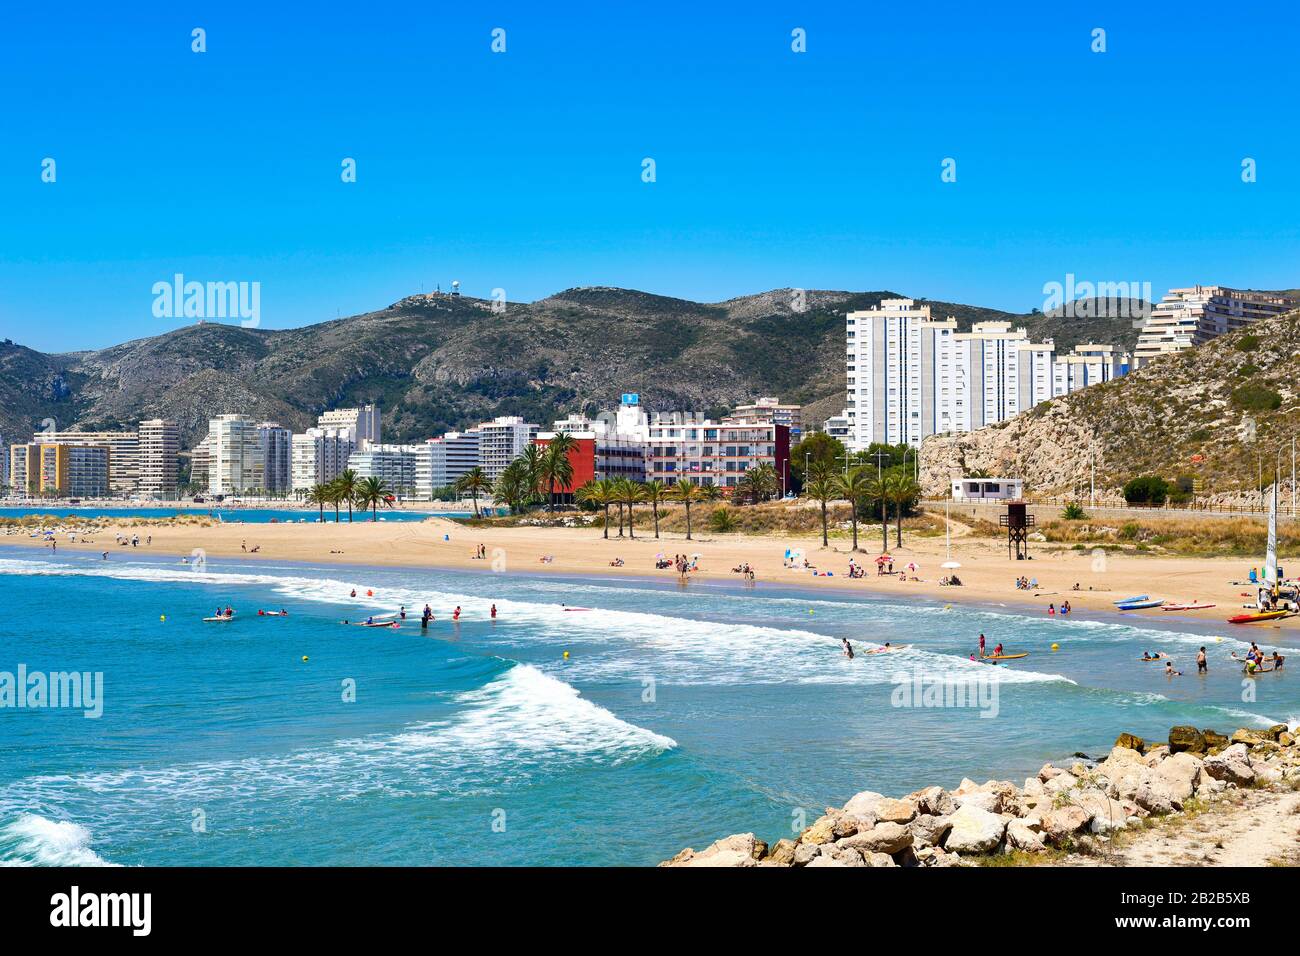 CULLERA, SPAIN - JUNE 23: Sunbathers at Raco Beach on June 23, 2016 in Cullera, Spain, with the the San Antonio Beach, the main beach in this popular Stock Photo